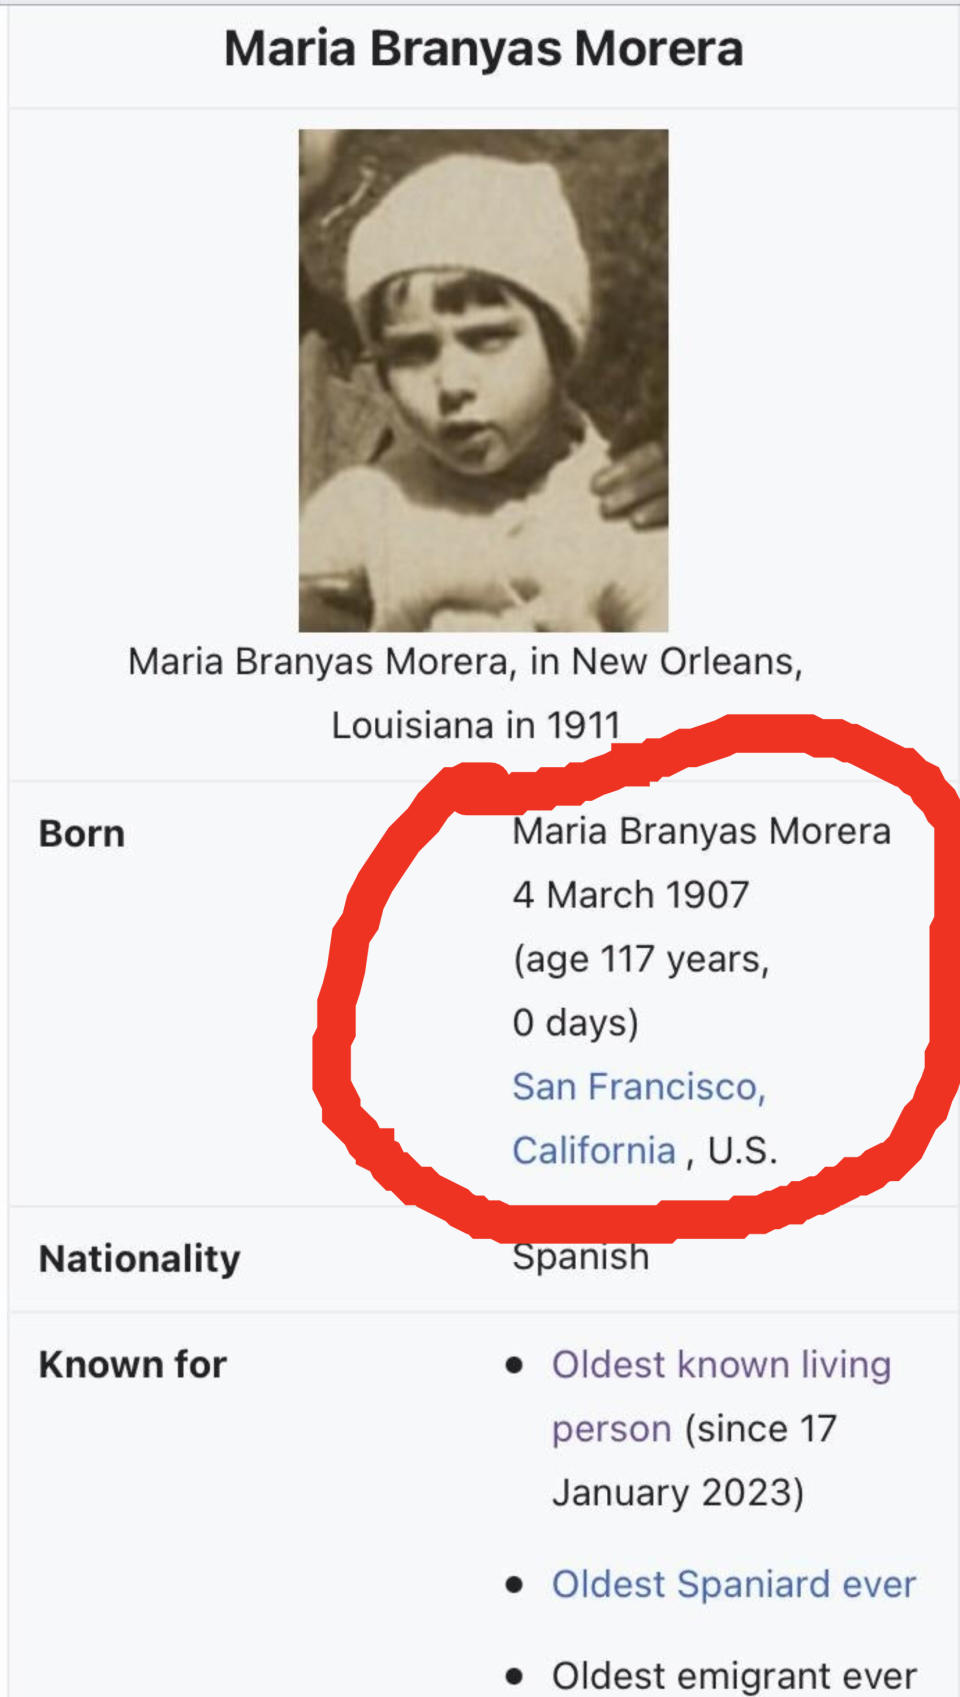 Maria Branyas Morena's Wikipedia page section with photo and facts including birth date, March 4, 1907, and nationality, Spanish